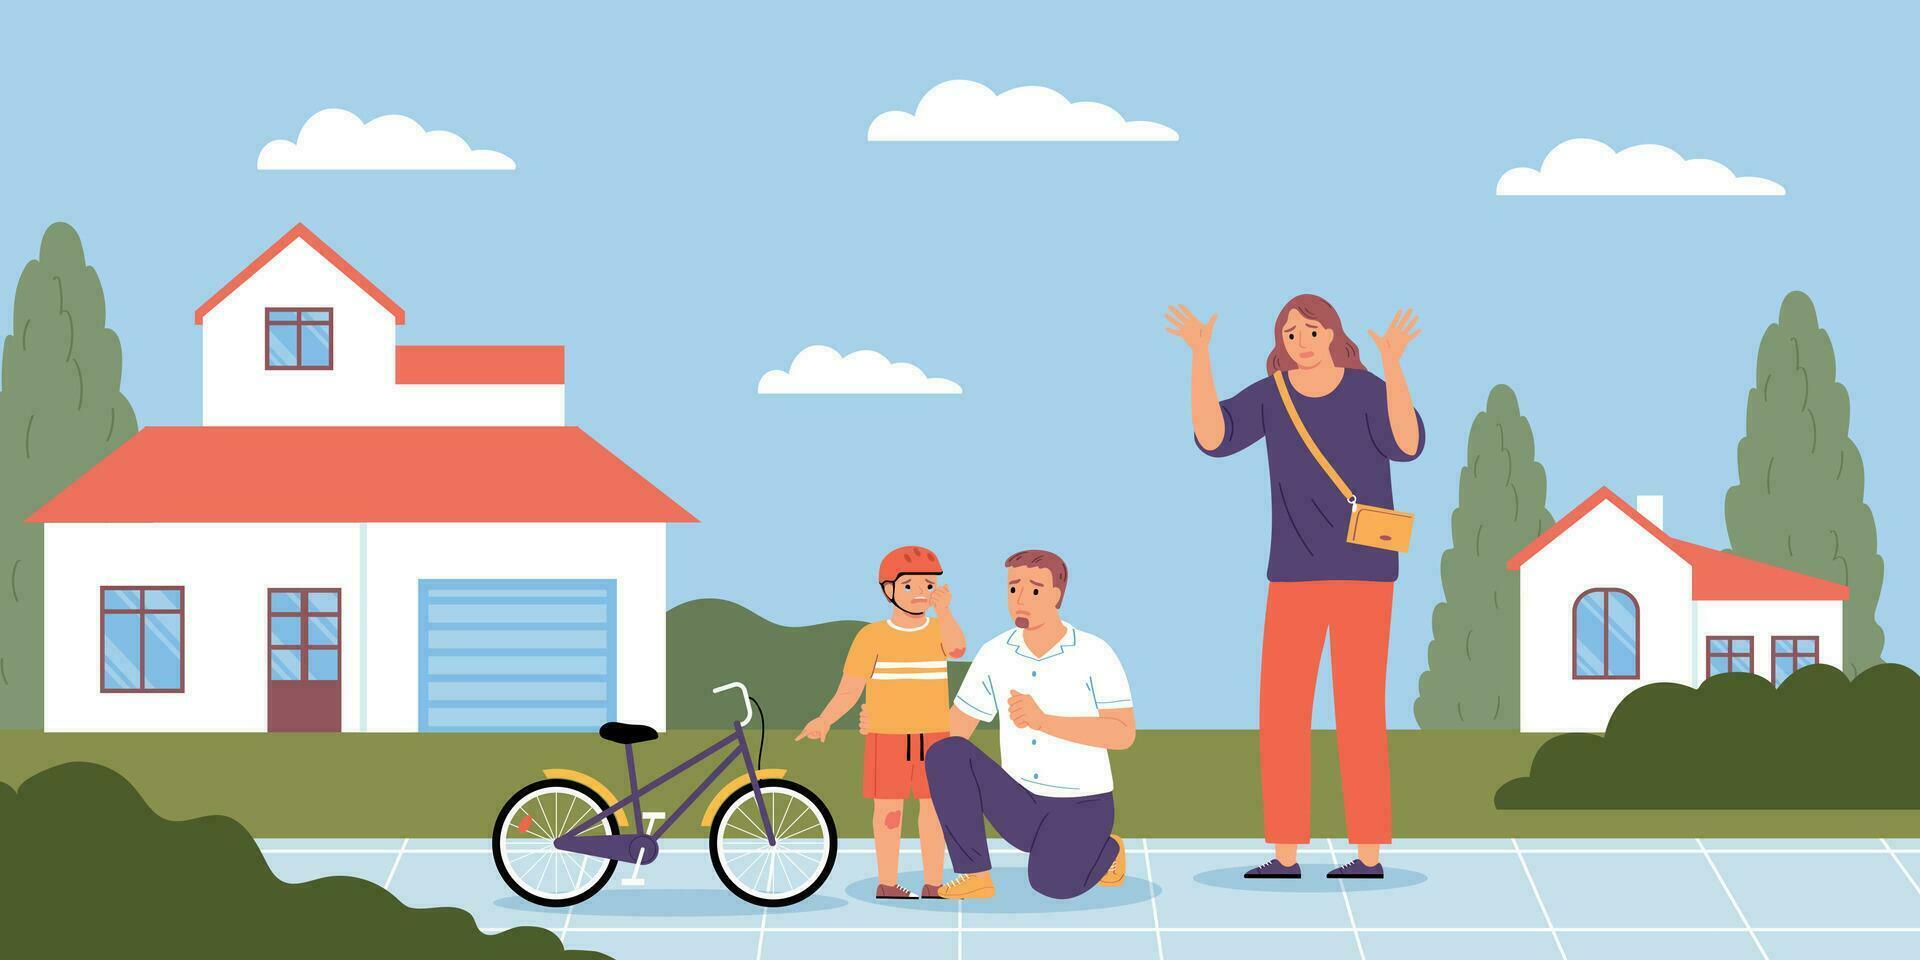 Bicycle Fall Parents Composition vector